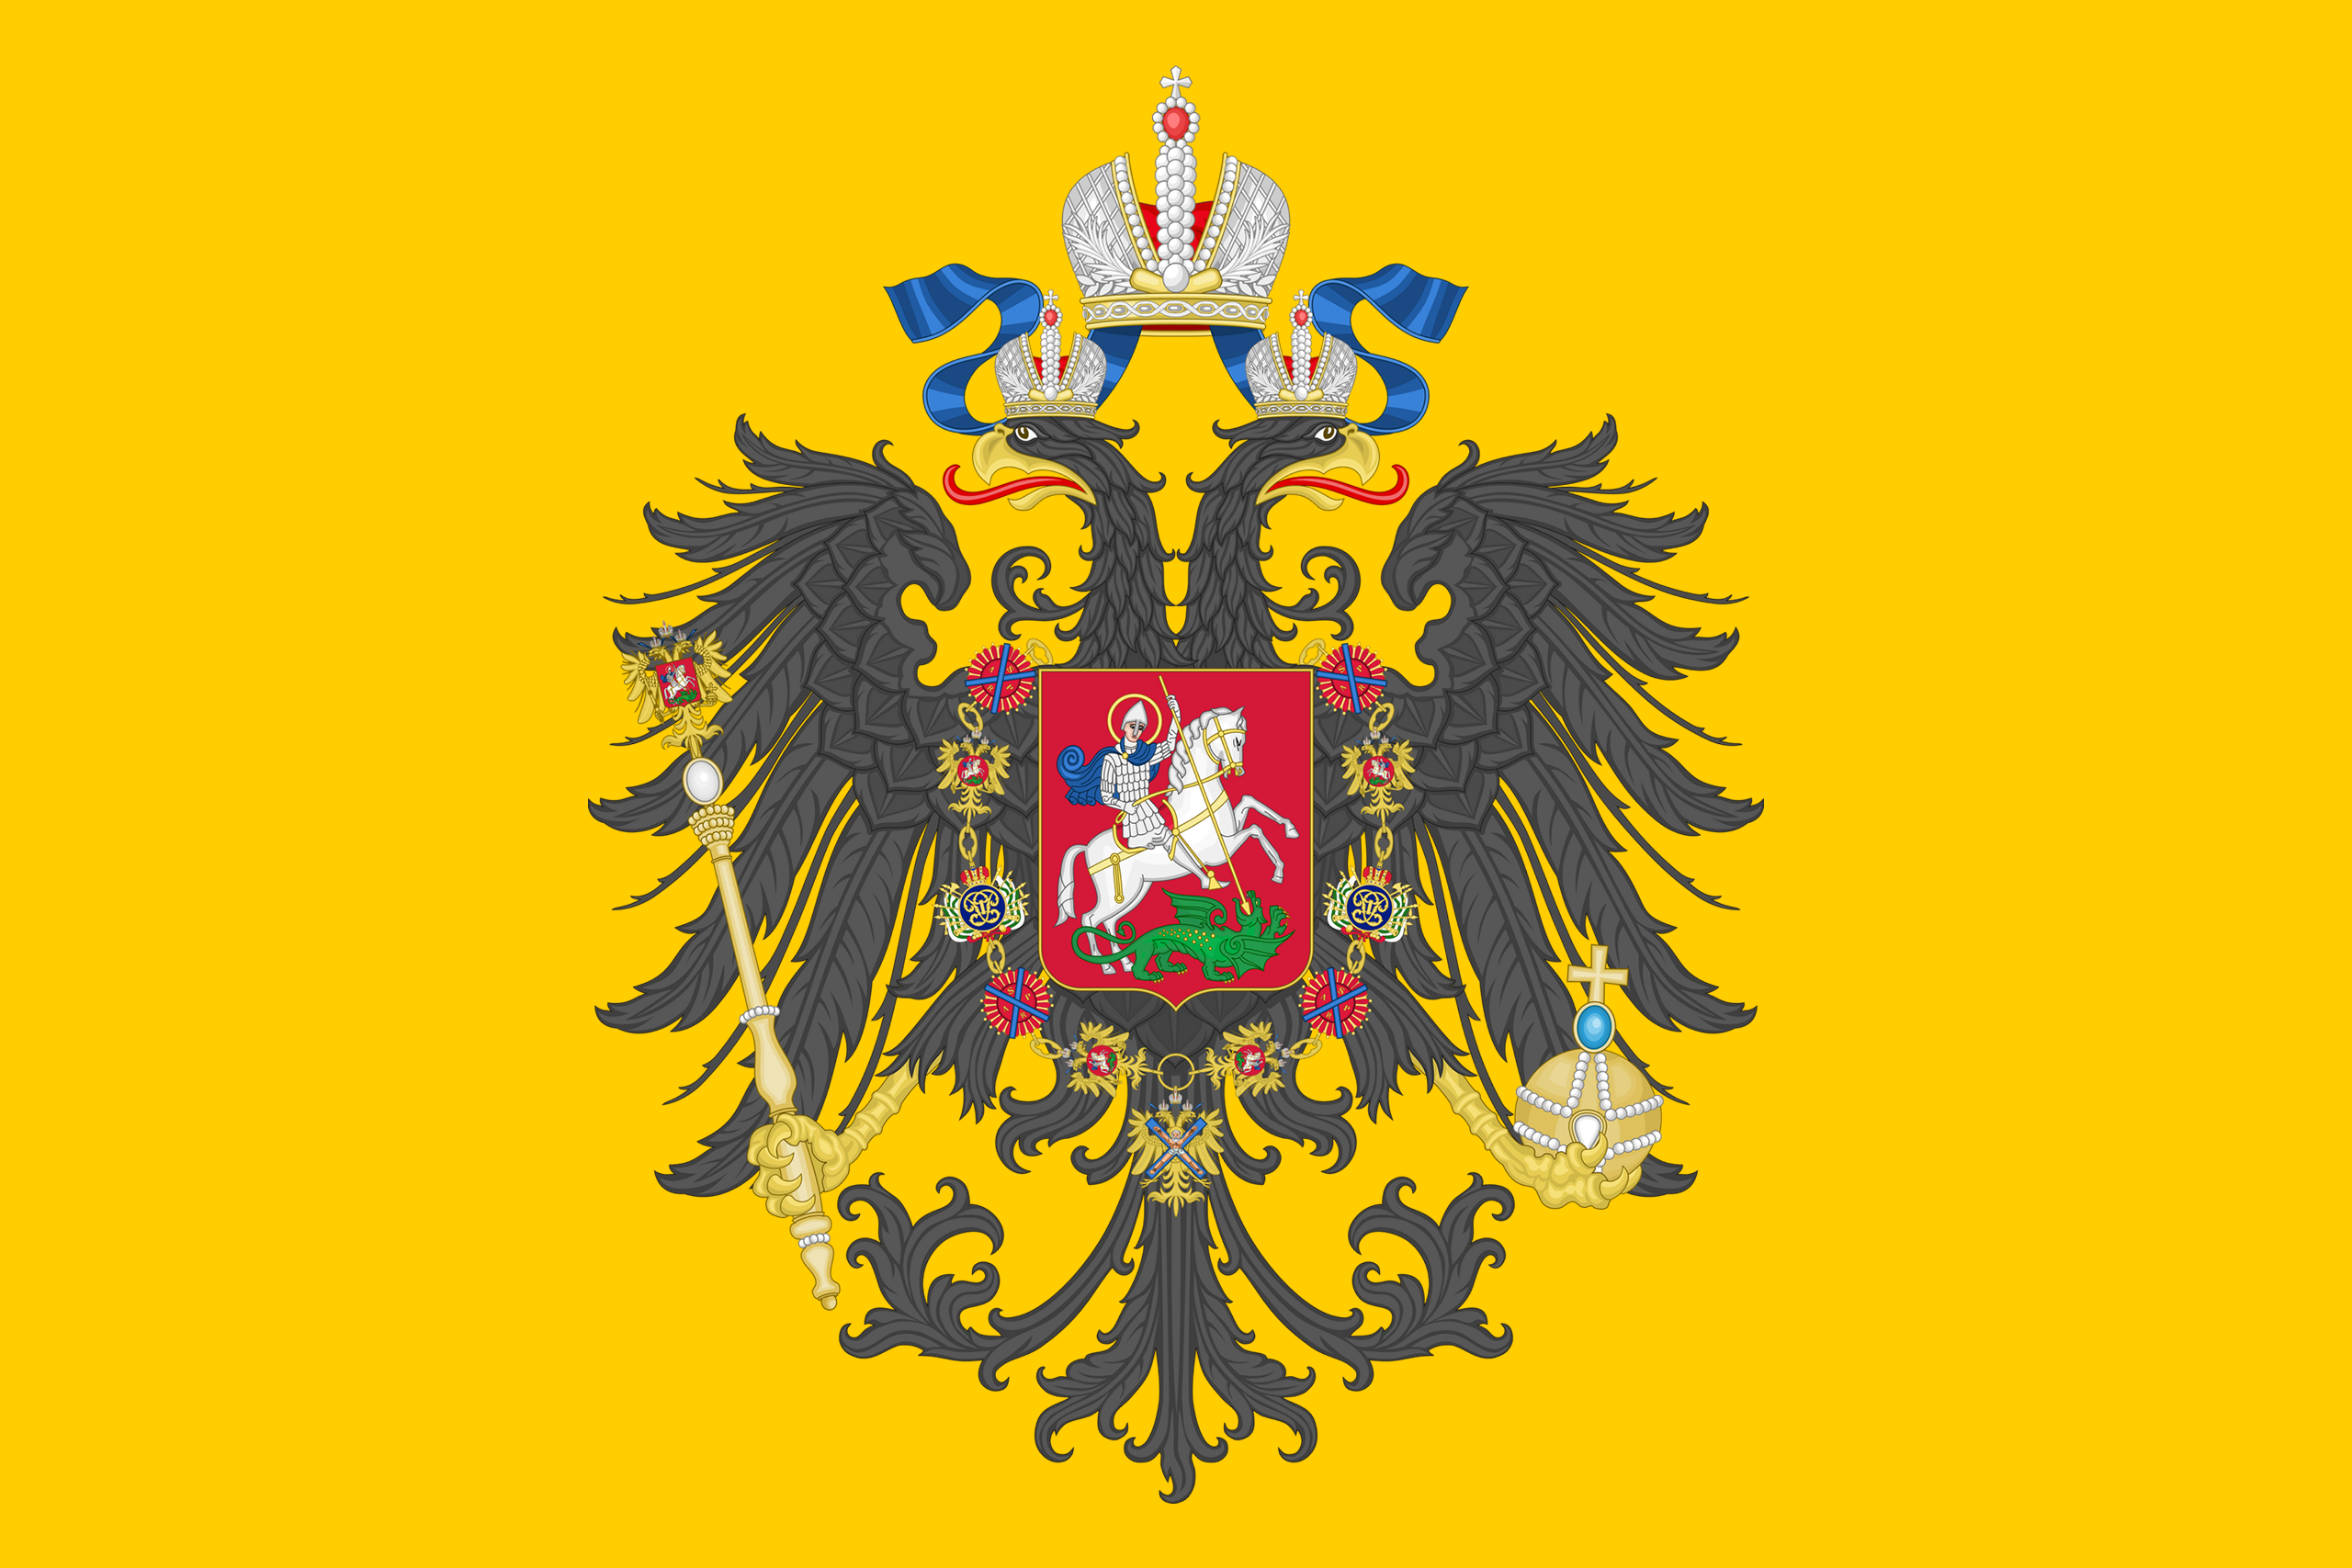 File:Flag of Russia (1858-1896; with coat of arms).png - Wikimedia Commons